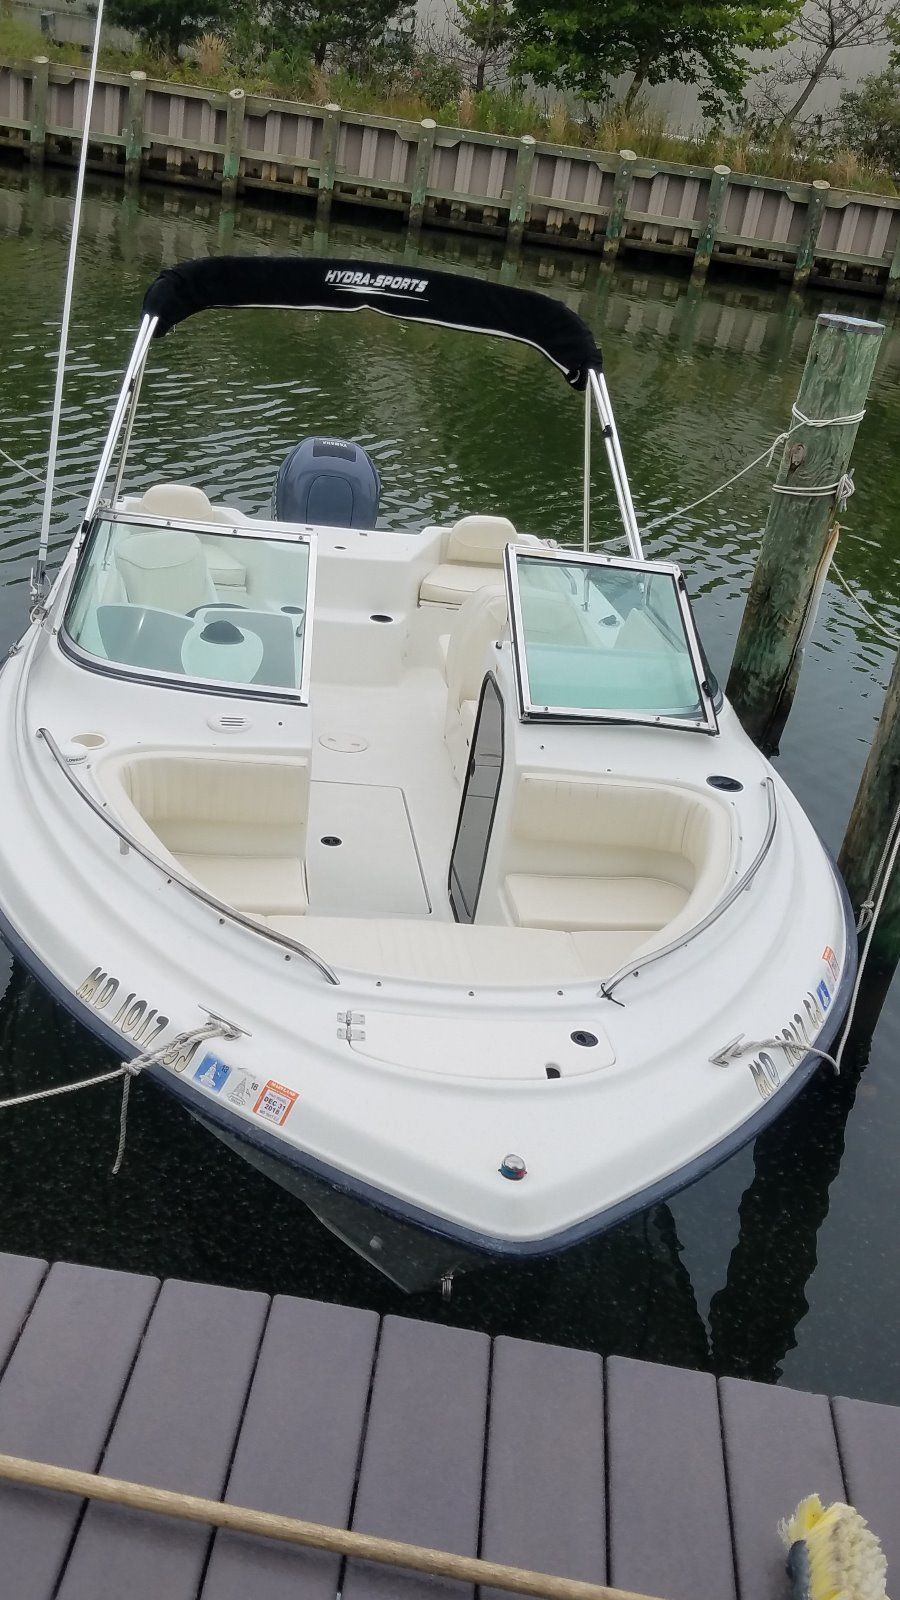 Hydra-Sports 2001 for sale for $9,900 - Boats-from-USA.com